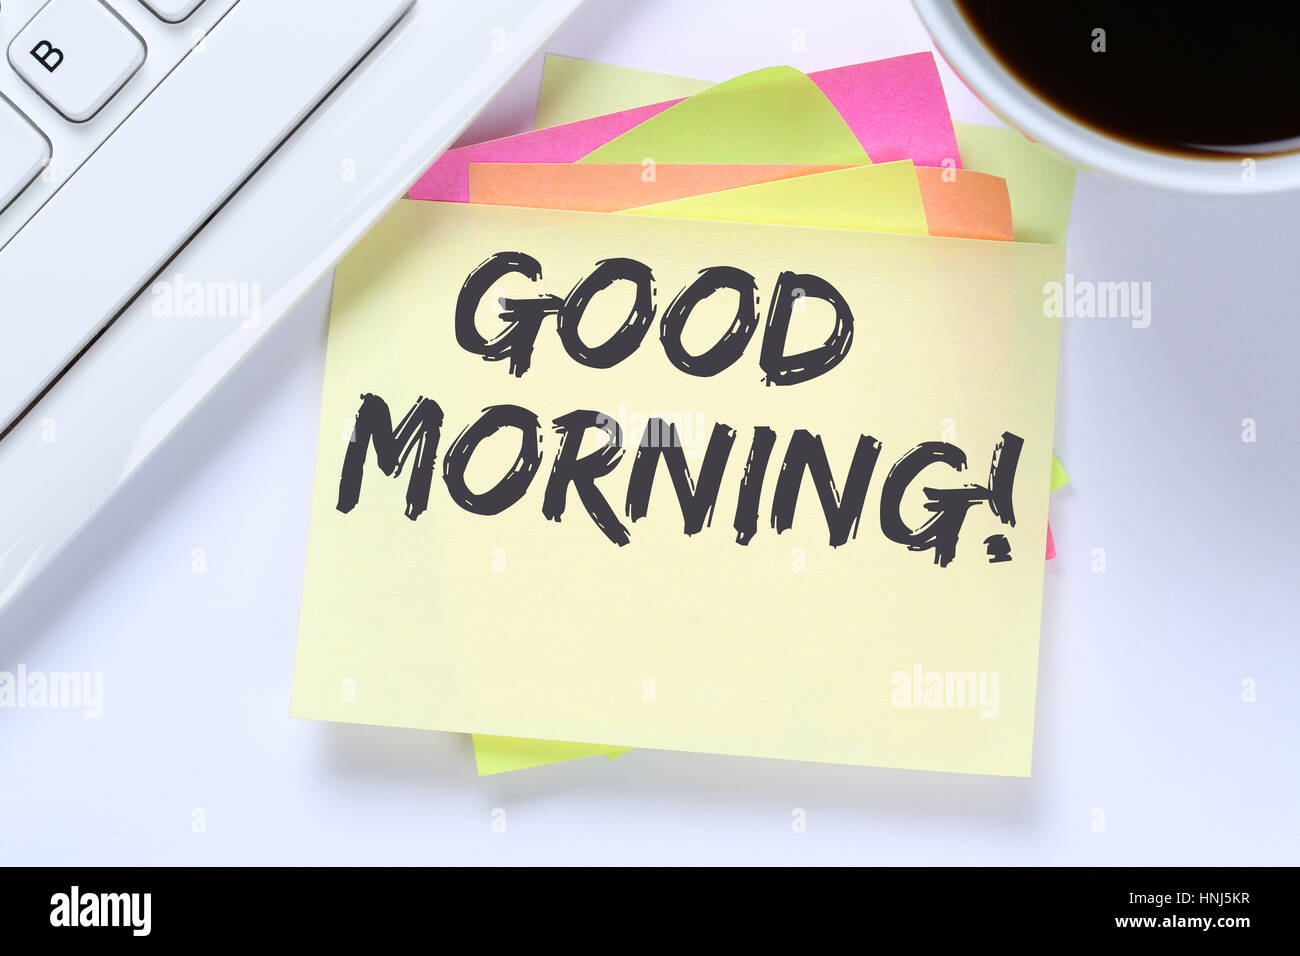 Good morning hello greeting welcome message business desk computer keyboard Stock Photo